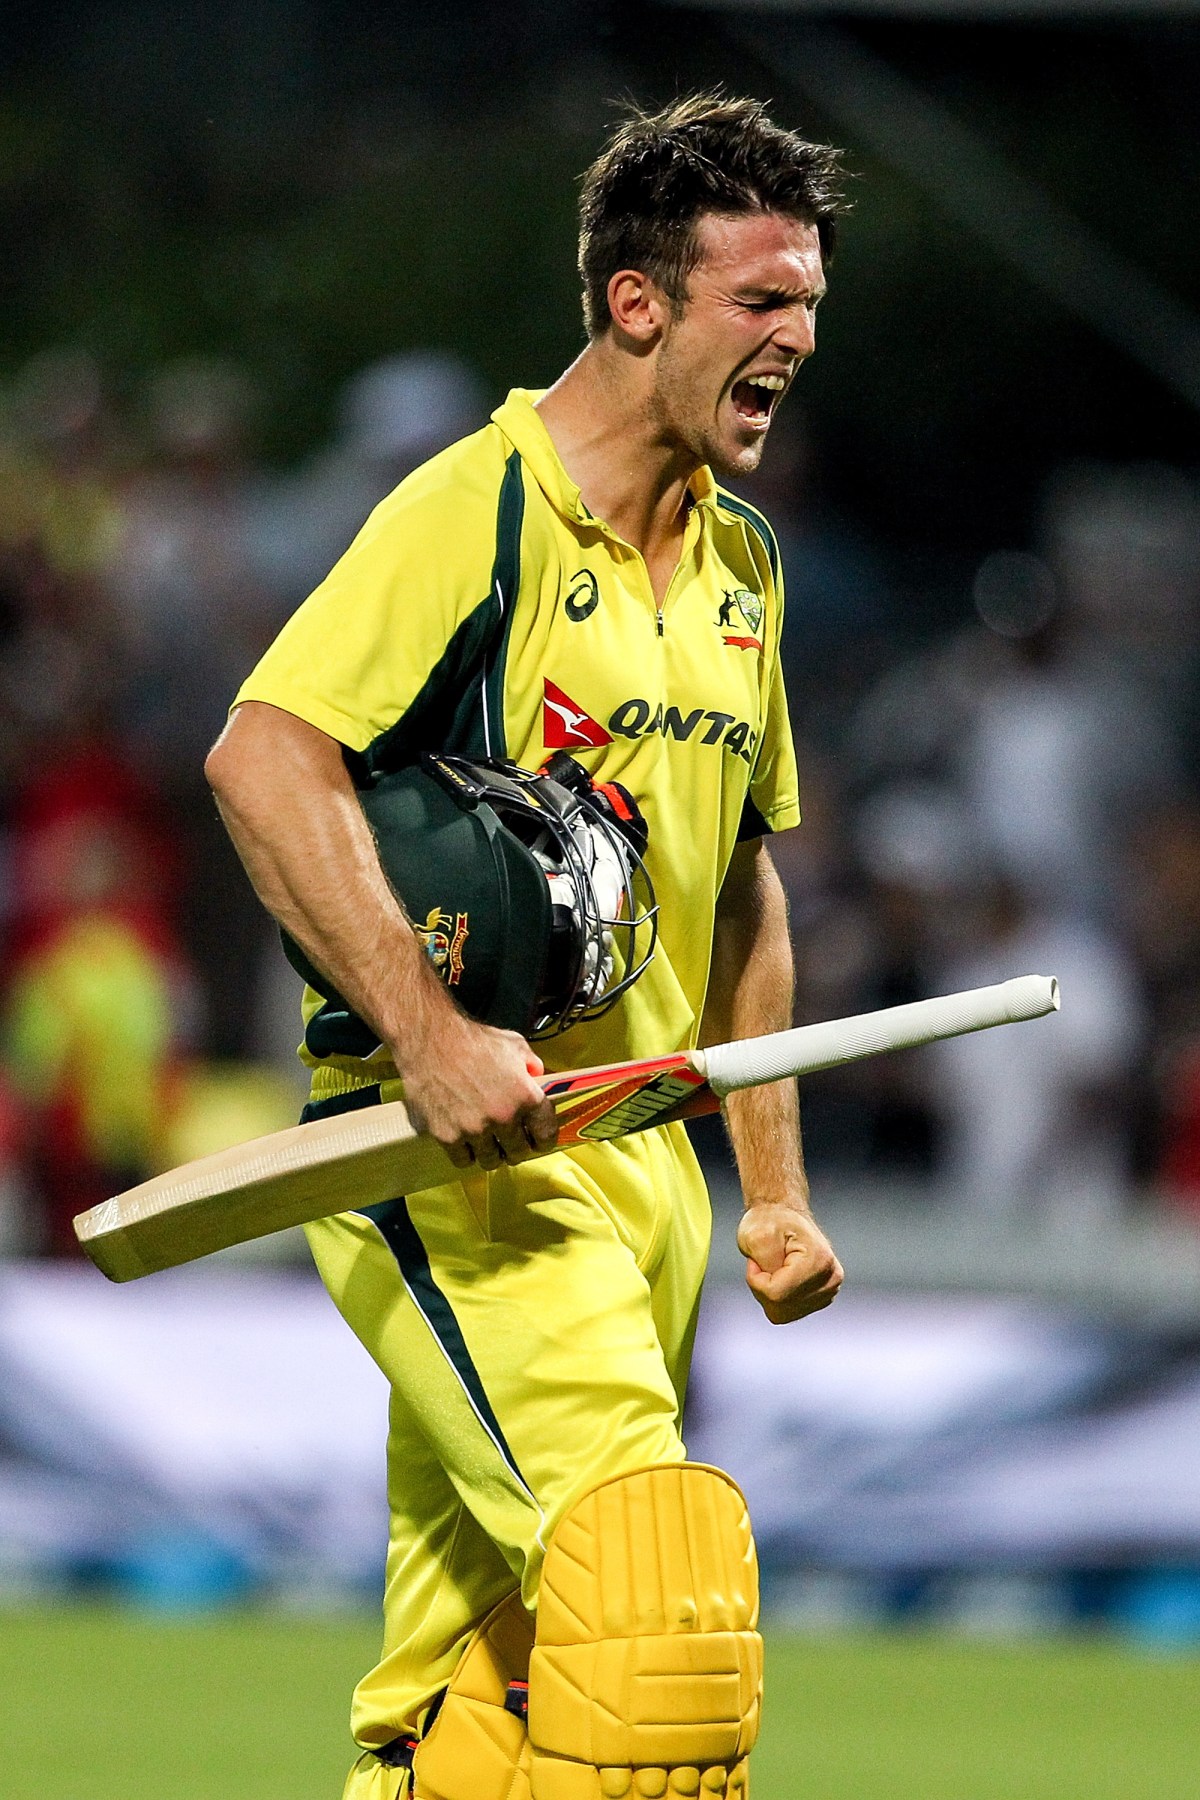 Mitchell Marsh of Australia reacts after being given out during the third Chappell-Hadlee Trophy New Zealand v Australia ODI at Seddon Park, Hamilton,ÊMonday, Feb. 8, 2016. (AAP Image/SNPA, Martin Hunter) NO ARCHIVING, EDITORIAL USE ONLY, IMAGES TO BE USED FOR NEWS REPORTING PURPOSES ONLY, NO COMMERCIAL USE WHATSOEVER, NO USE IN BOOKS WITHOUT PRIOR WRITTEN CONSENT FROM AAP